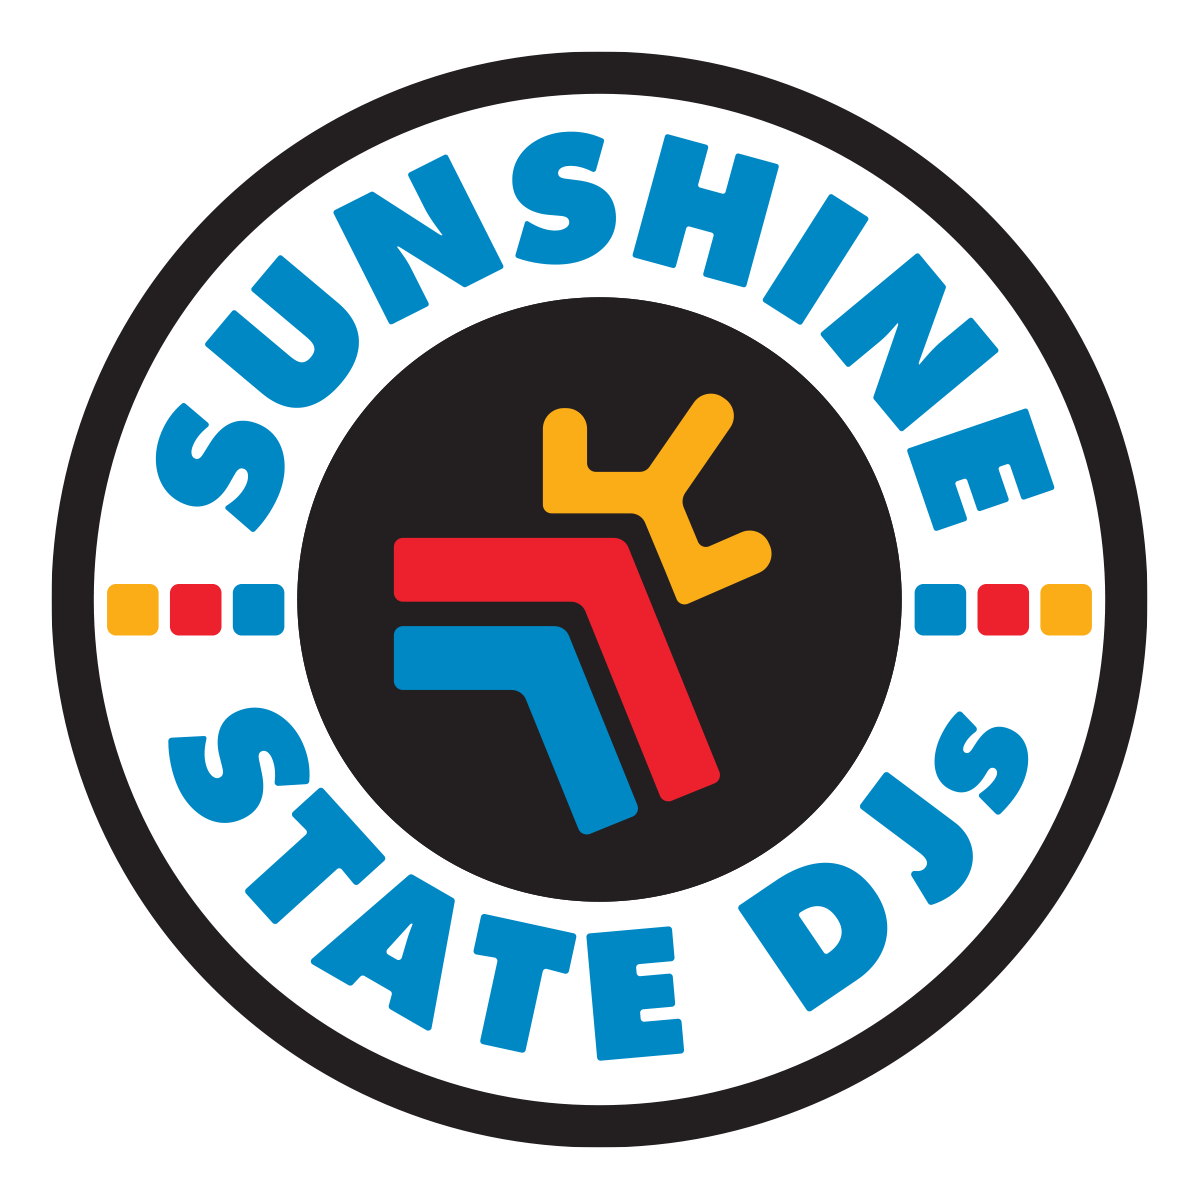 Sunshine State DJs logo design by logo designer TrioSigns,Inc. for your inspiration and for the worlds largest logo competition